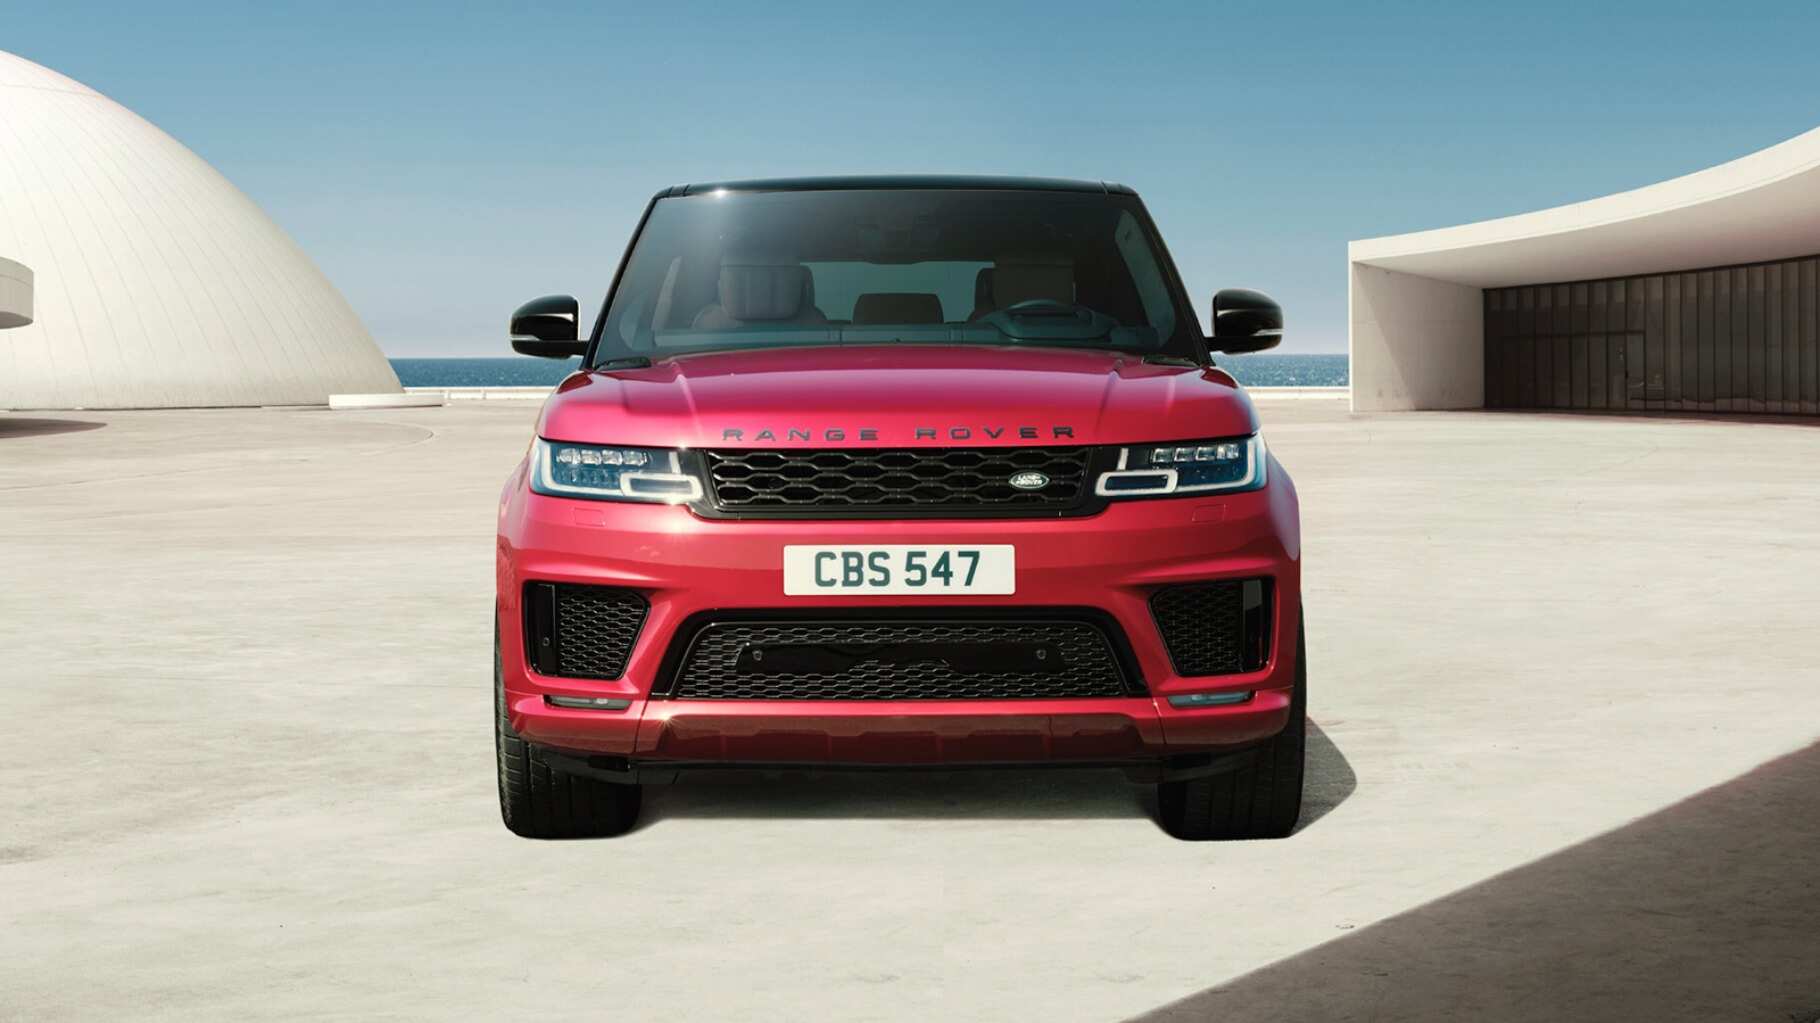 Front View of Red Range Rover Sport.